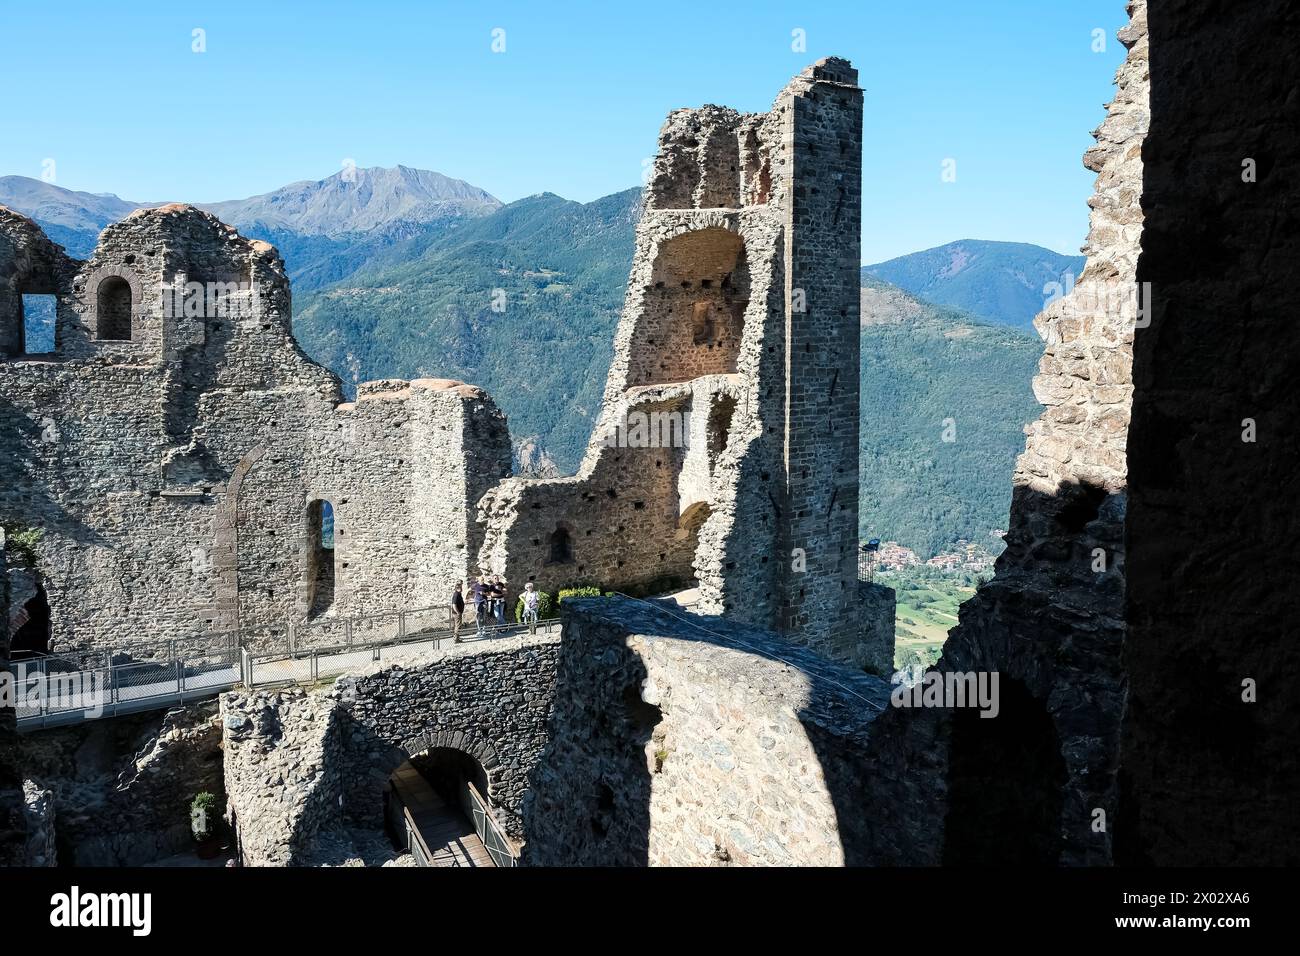 Detail of the Sacra di San Michele, (Saint Michael's Abbey), a religious complex on Mount Pirchiriano, on south side of the Val di Susa Stock Photo